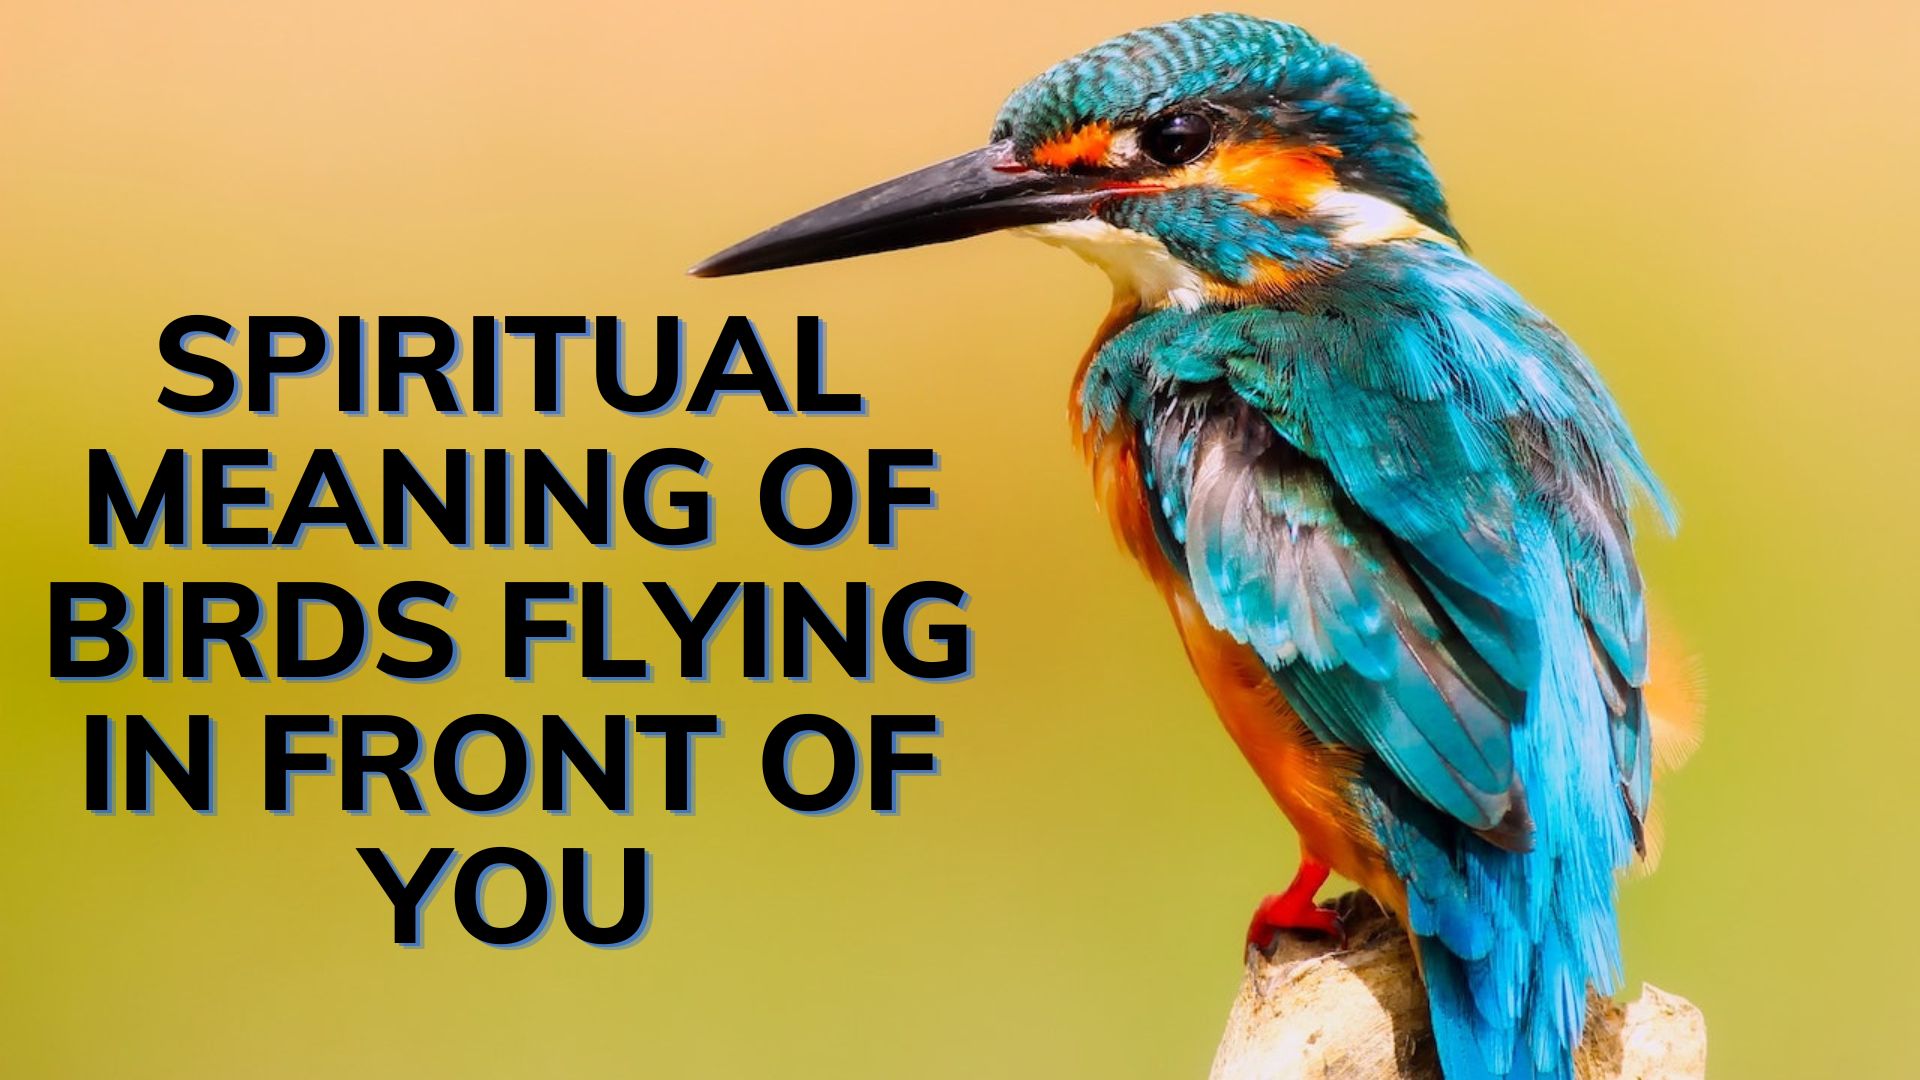 Spiritual Meaning Of Birds Flying In Front Of You